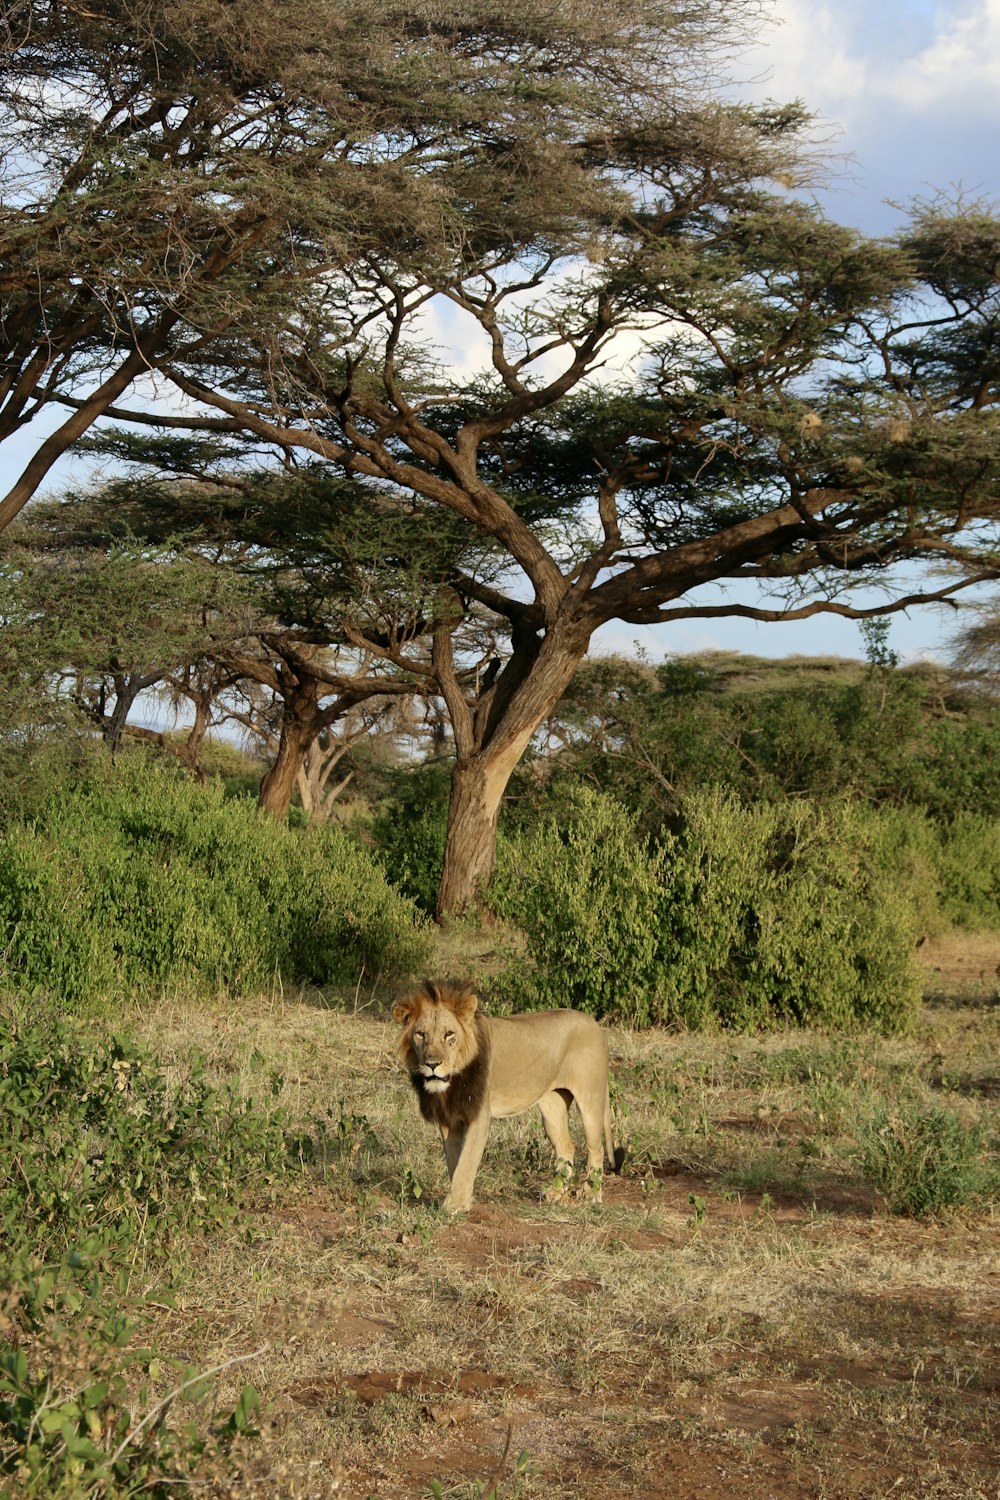 a lion standing in a field next to a tree